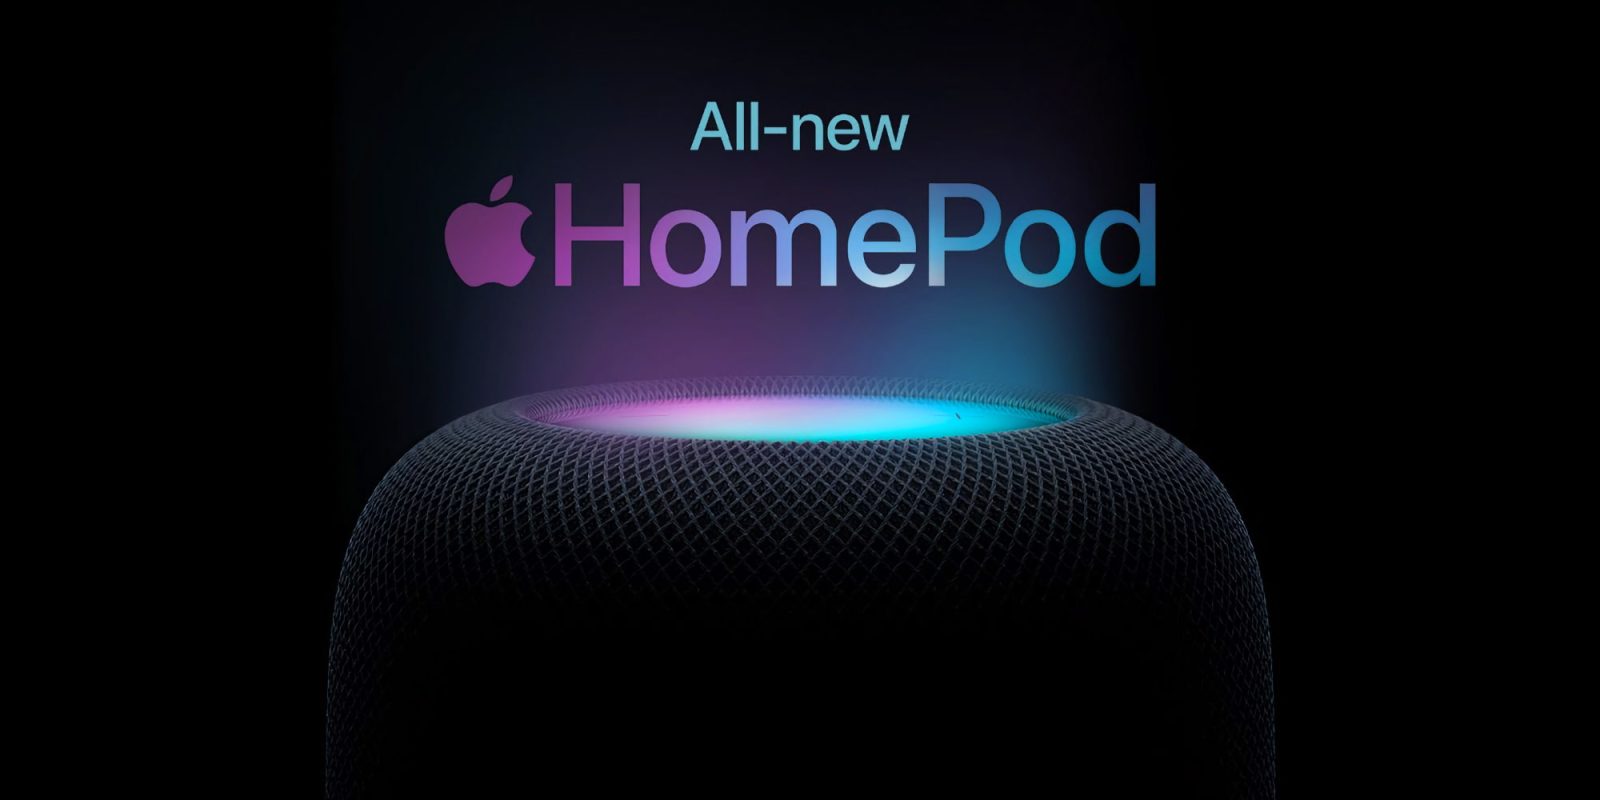 All-new HomePod